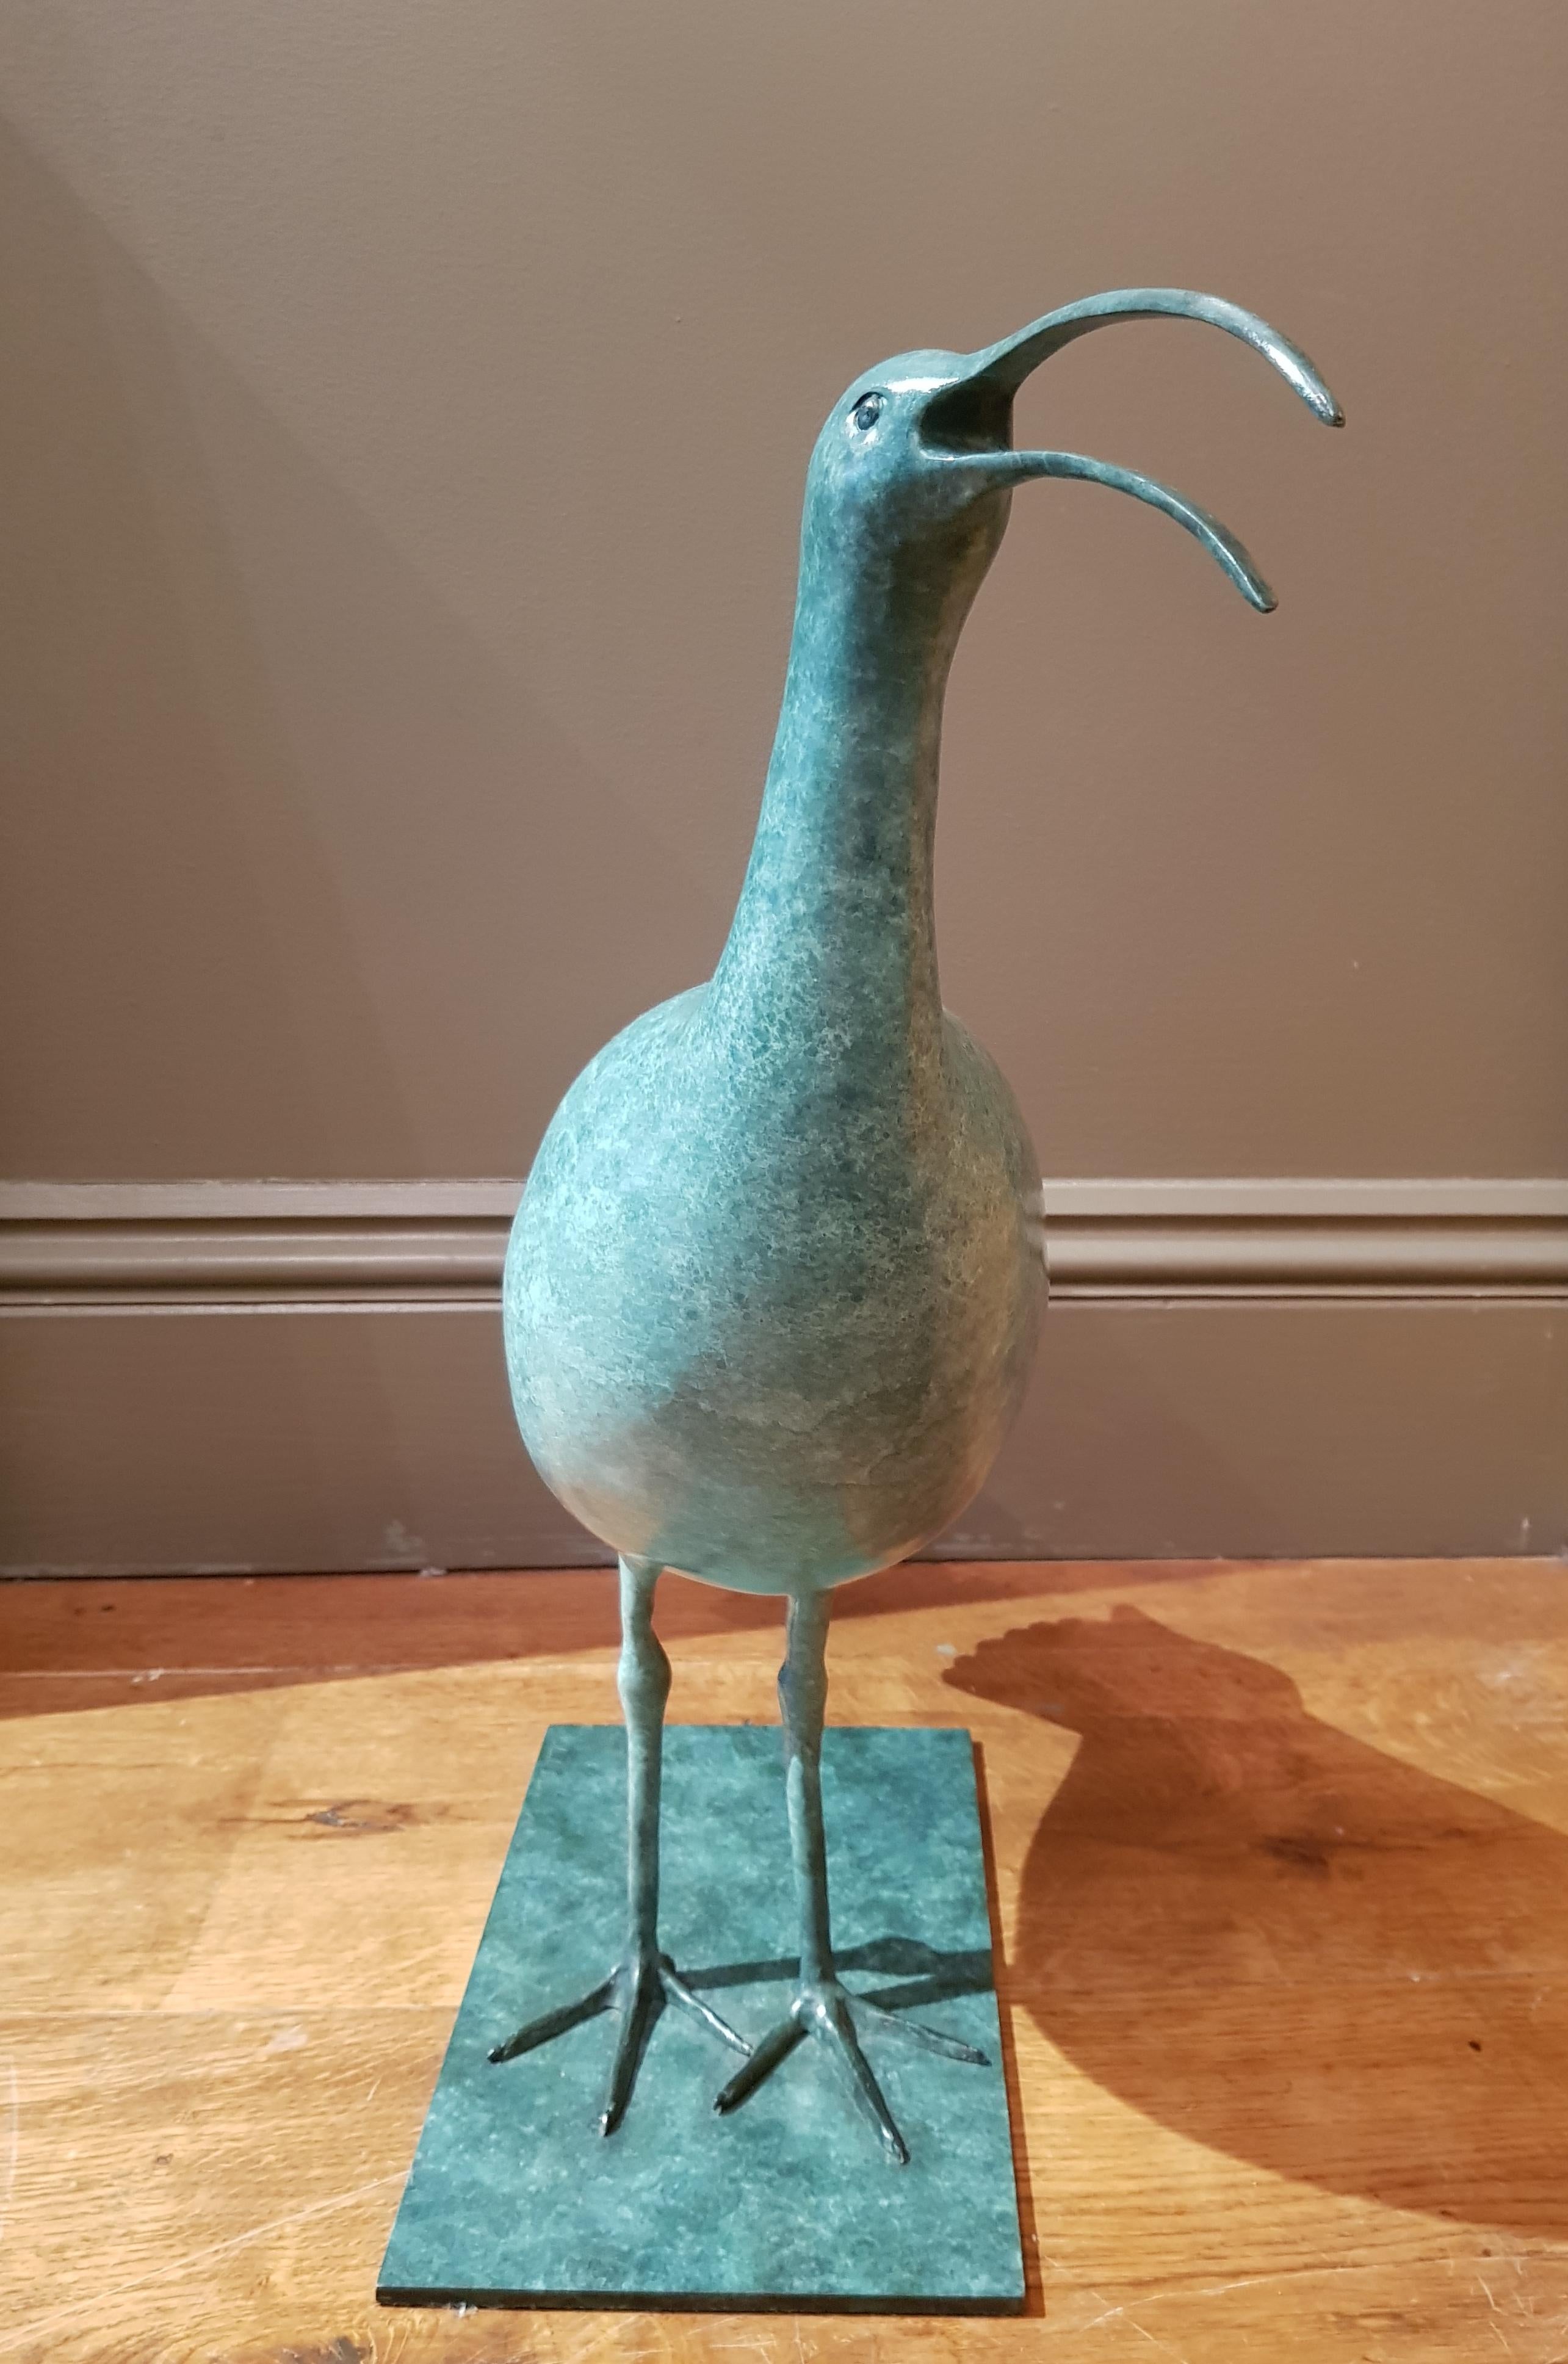 'Calling Curlew' is a Solid Bronze Bird Sculpture by Richard Smith is a stunning piece. The endangered curlew is captured beautifully and sculpted with such love - you can feel the artist's love of the animal.

Richard Smith has gained an